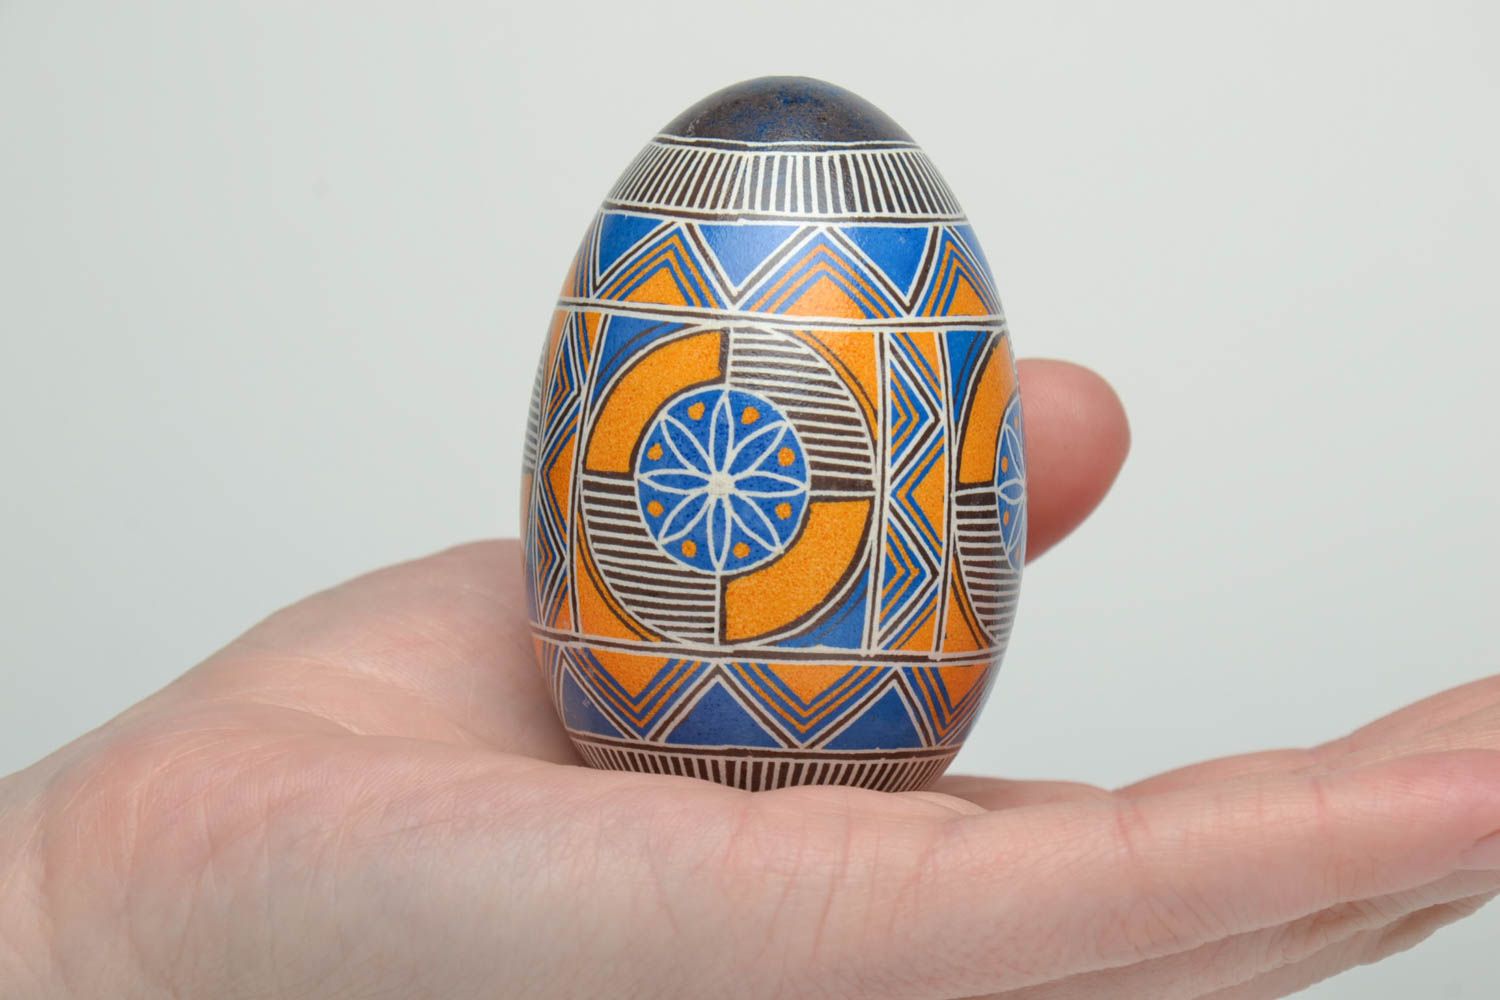 Painted goose egg with geometric ornament photo 4